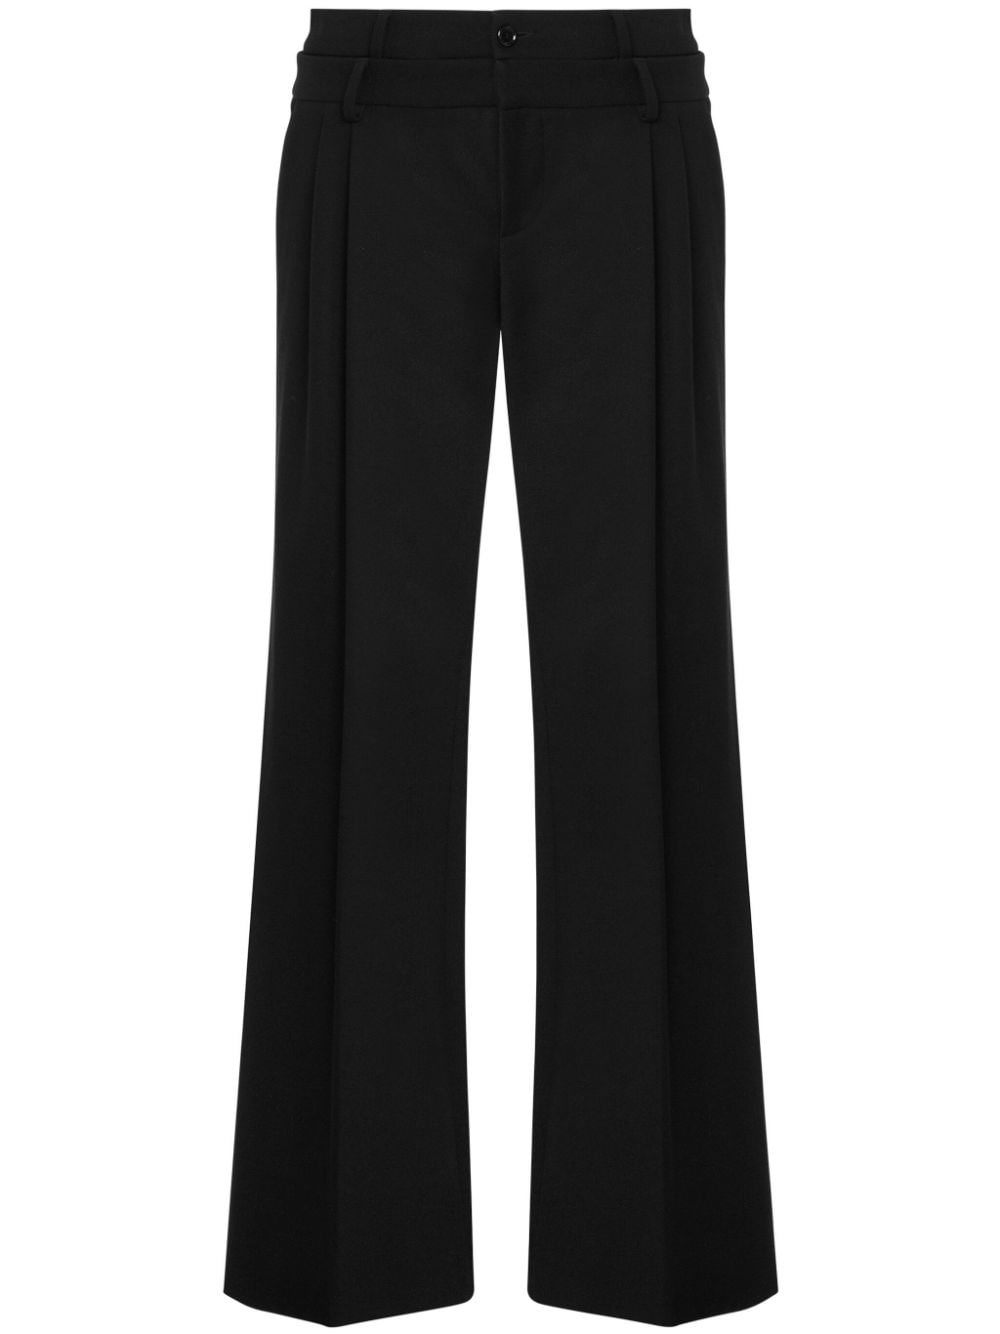 Moschino double-waistband flared trousers - Black